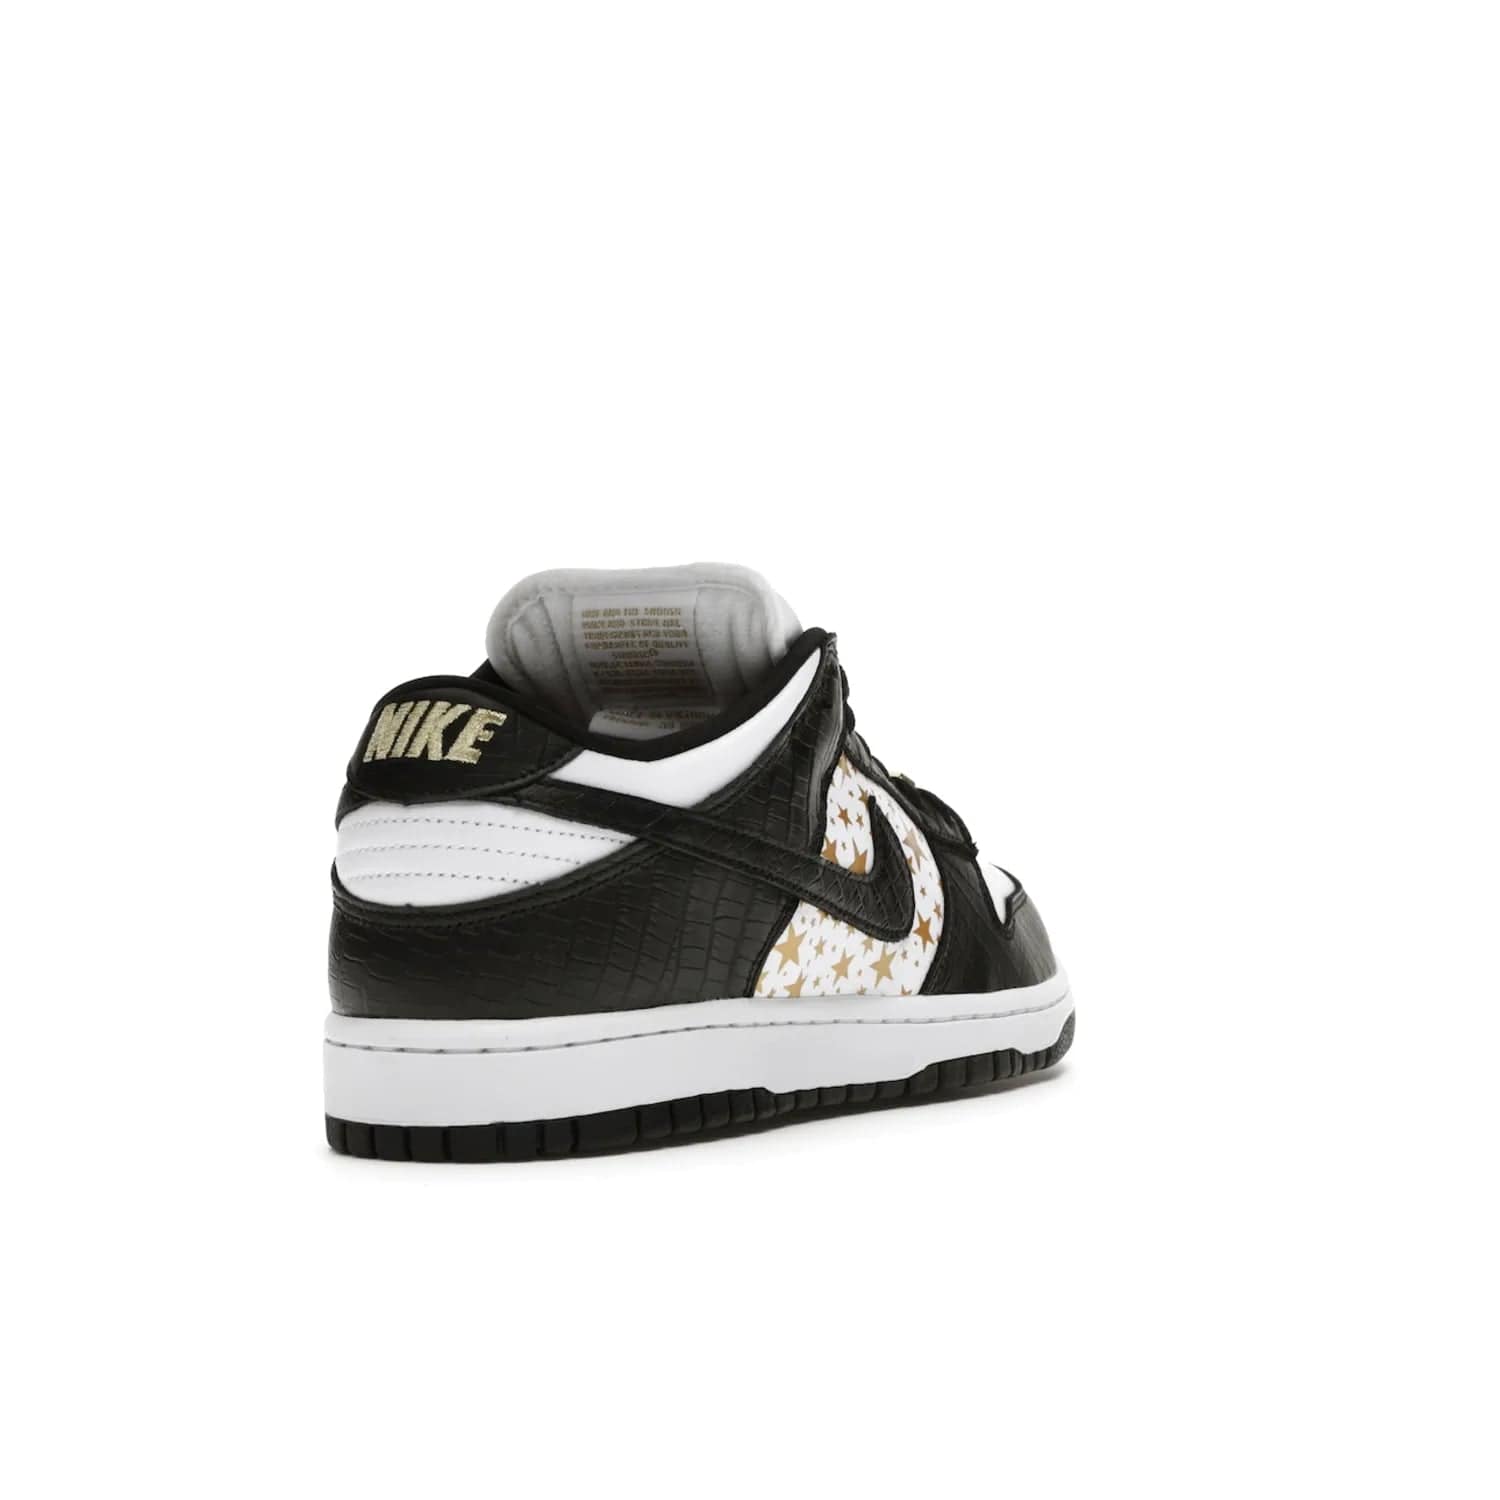 Nike SB Dunk Low Supreme Stars Black (2021) - Image 31 - Only at www.BallersClubKickz.com - Retro style and signature details make the Nike SB Dunk Low Supreme Black a must-have. This special edition shoe features a white leather upper and black croc skin overlays complemented by gold stars and deubré. Enjoy a piece of SB history and grab yours today.